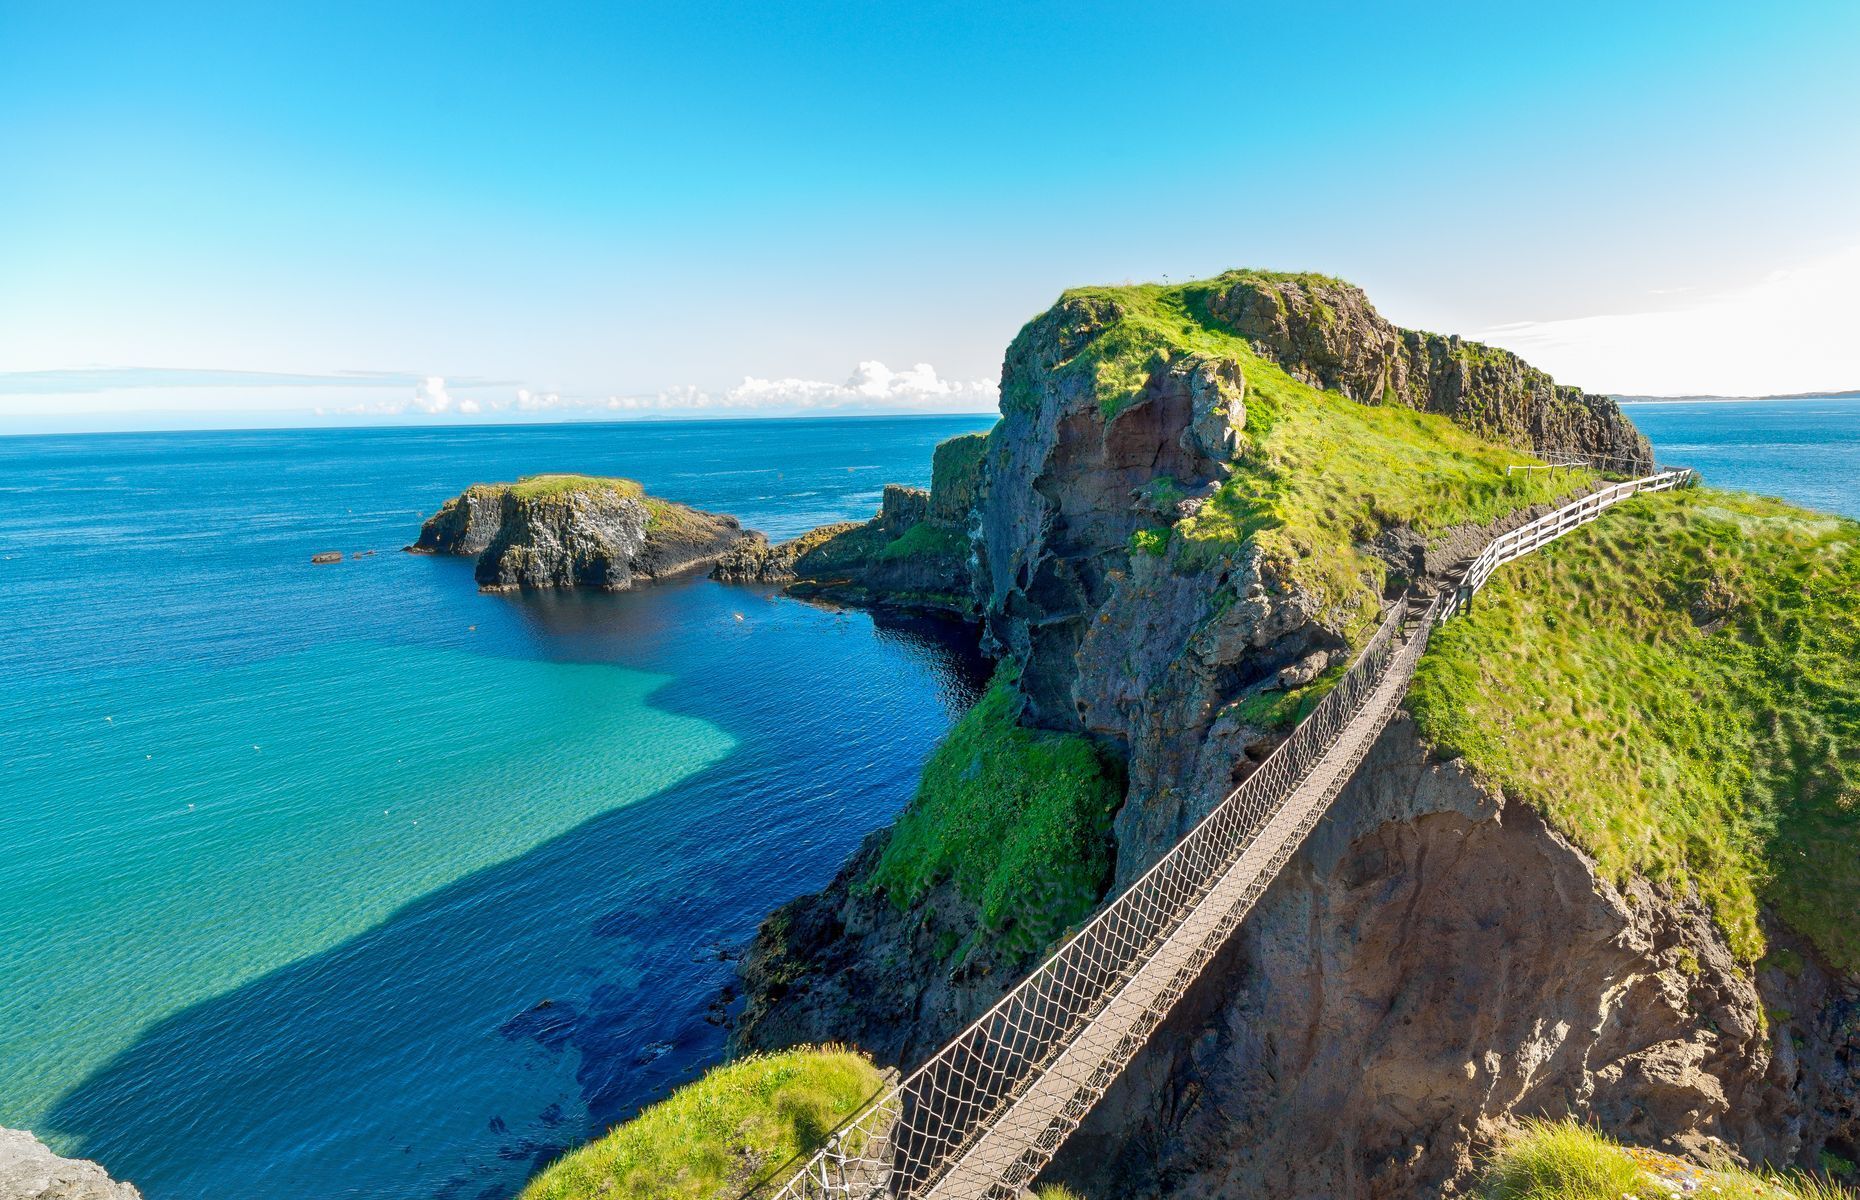 <p>Built in 1755 by salmon fishermen to access <a href="https://www.nationaltrust.org.uk/carrick-a-rede" rel="noreferrer noopener">Carrick-a-Rede Island</a><a href="https://www.nationaltrust.org.uk/carrick-a-rede" rel="noreferrer noopener">,</a> this suspension bridge helps visitors cross an imposing chasm that’s more than 30 metres deep. The unusual walkway also offers a breathtaking view of the sea and coastal road.</p>